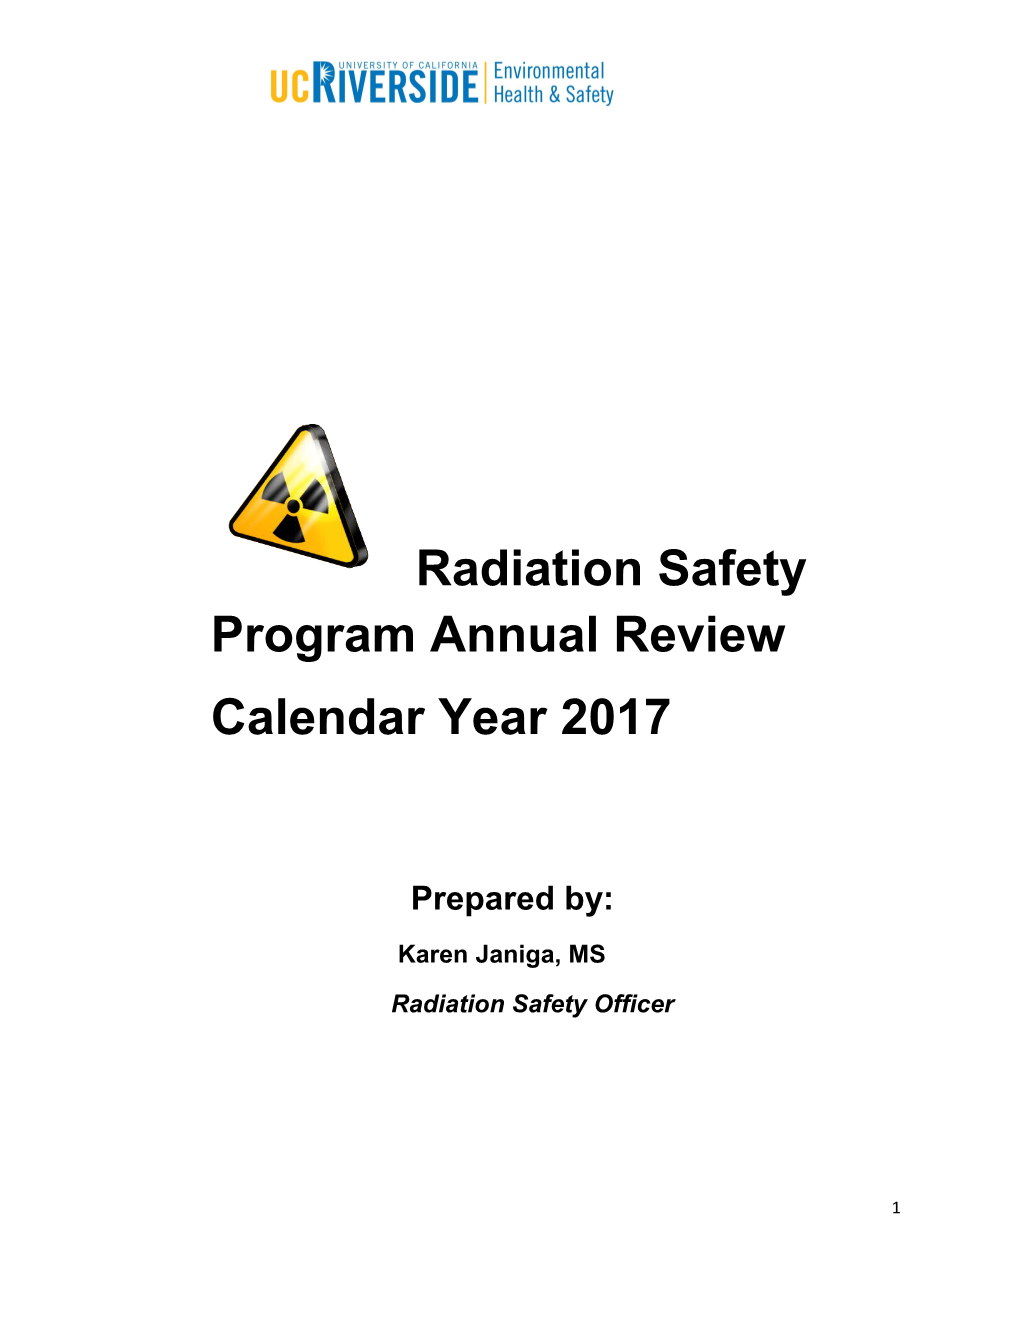 TO: Radiation Safety Committee